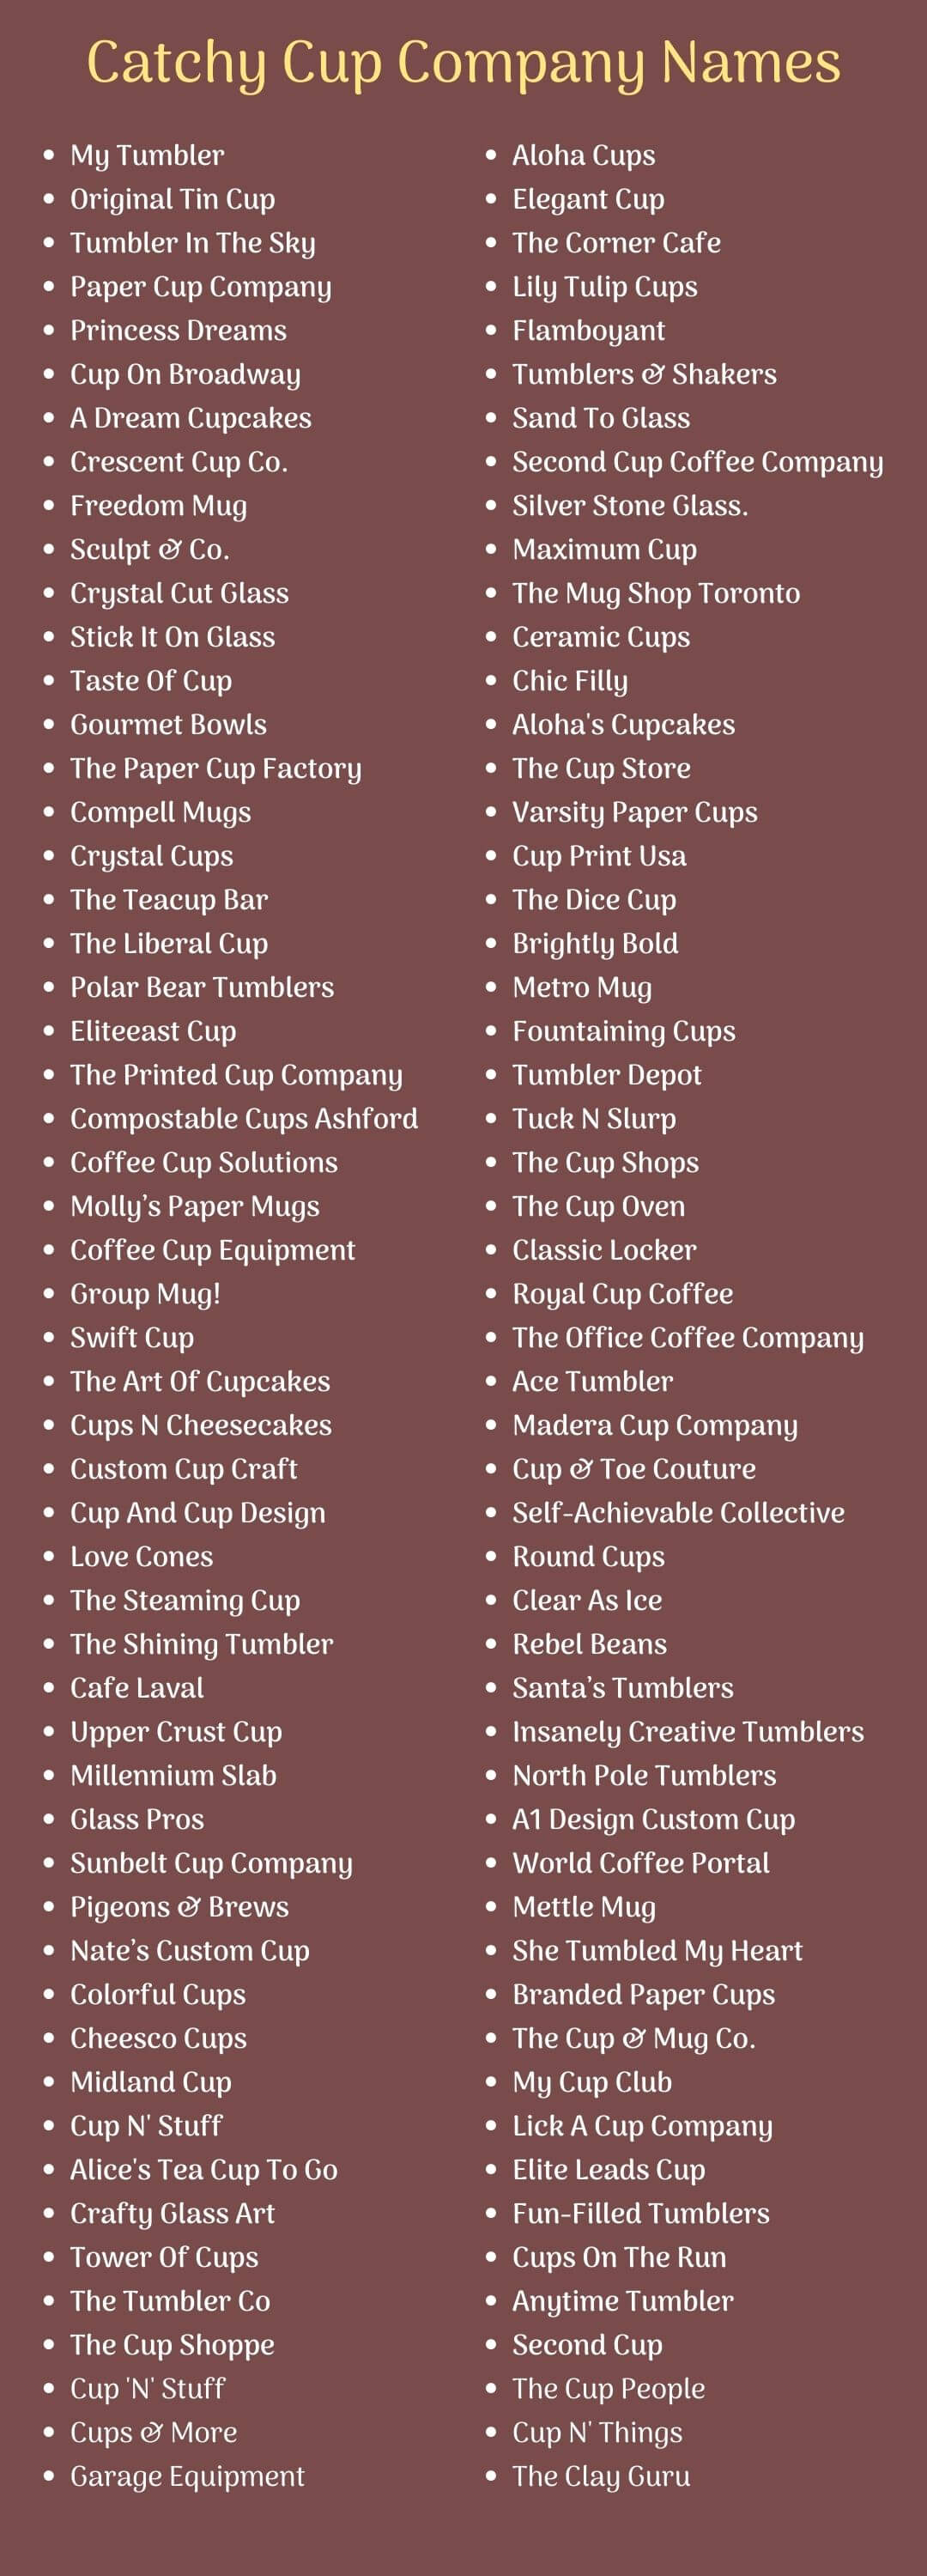 Catchy Cup Company Names ideas 